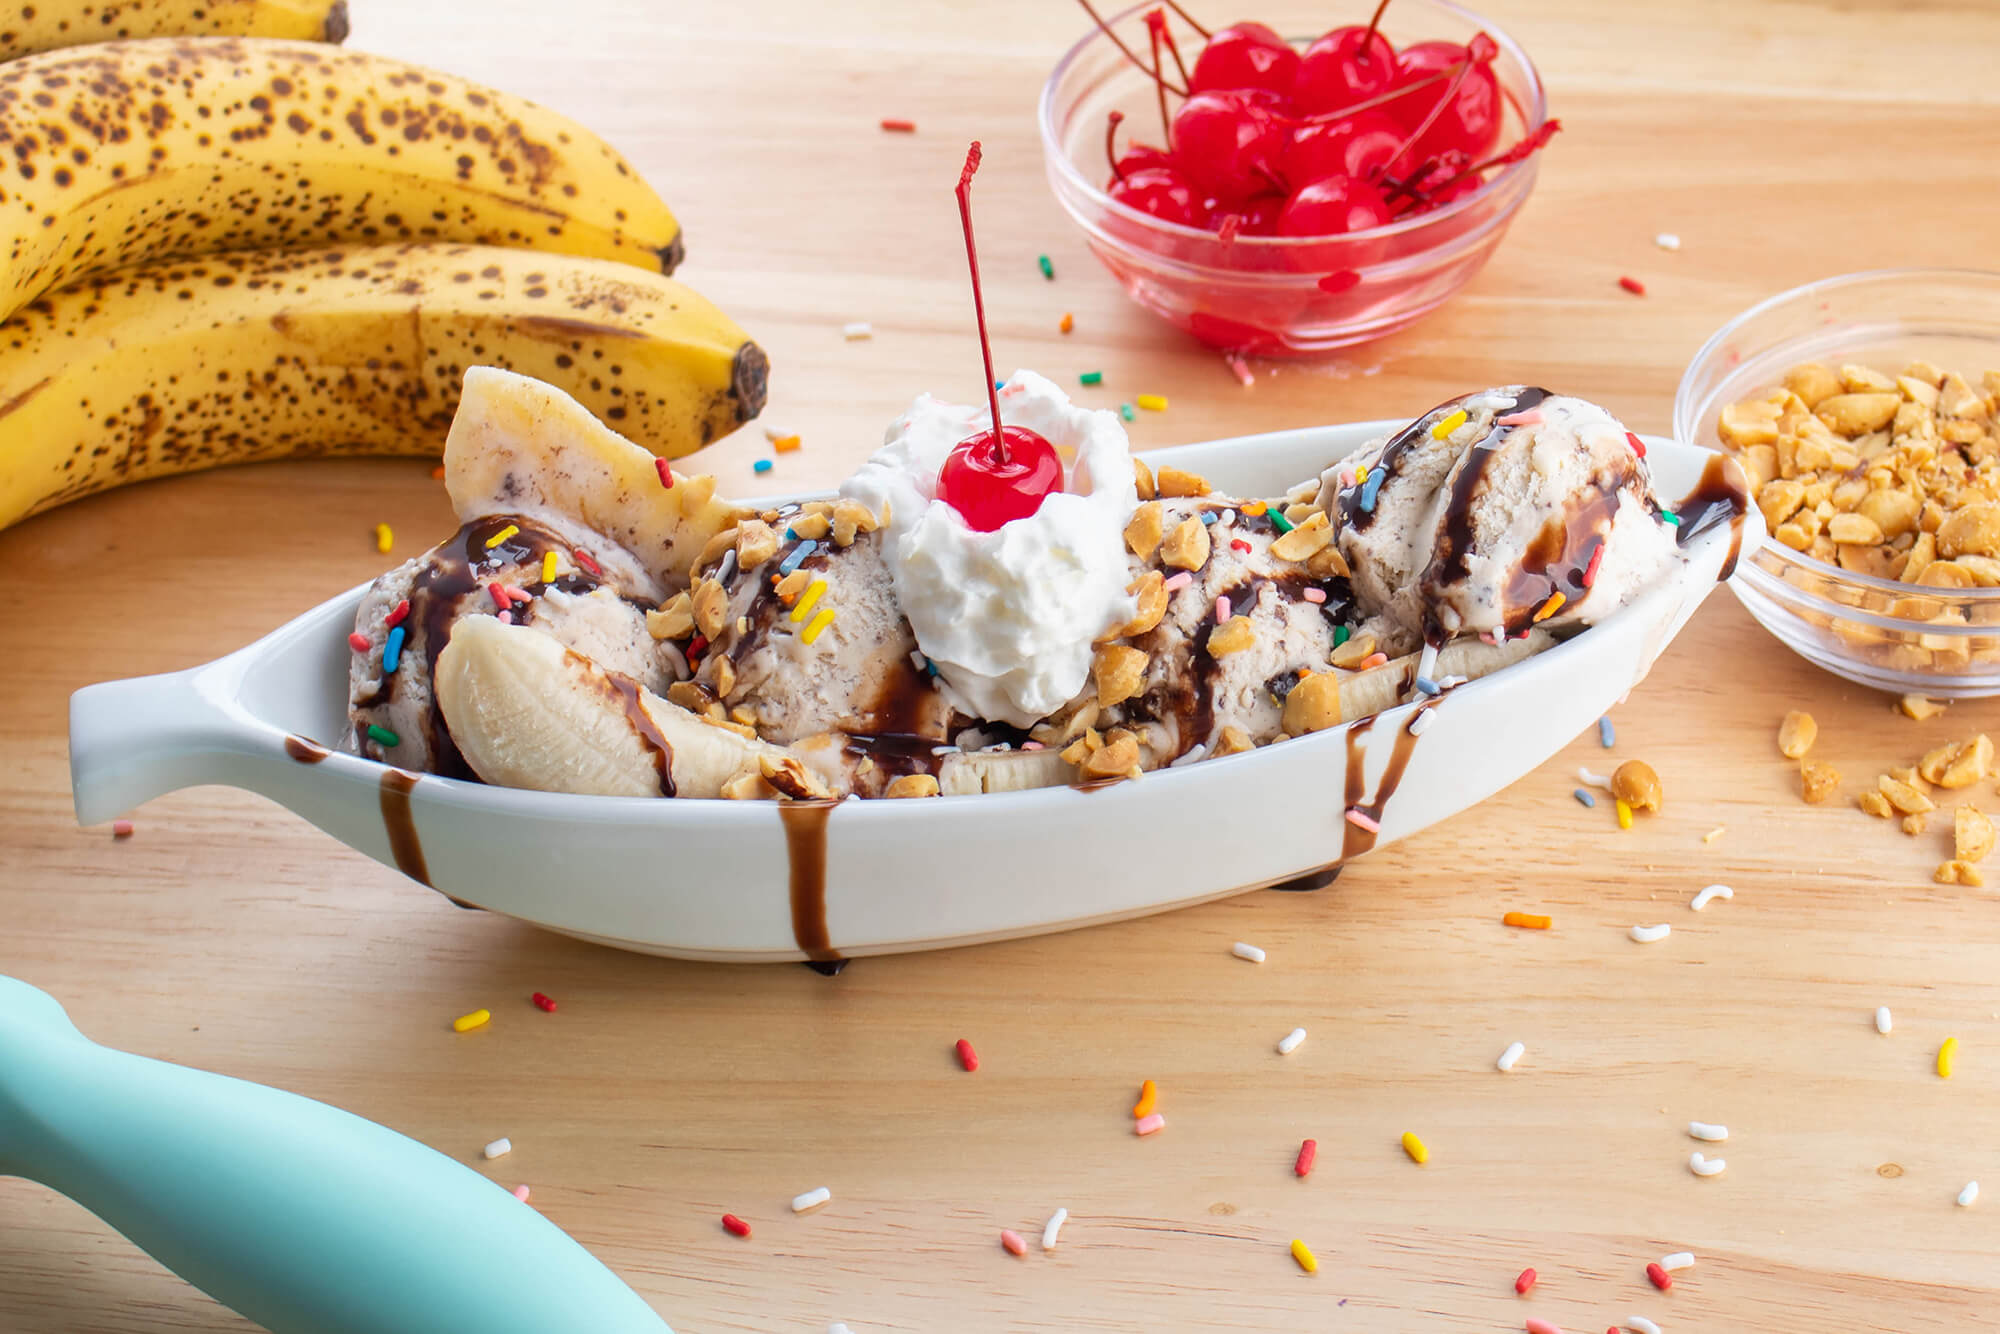 Celebrate Banana Split Day with this simple recipe!